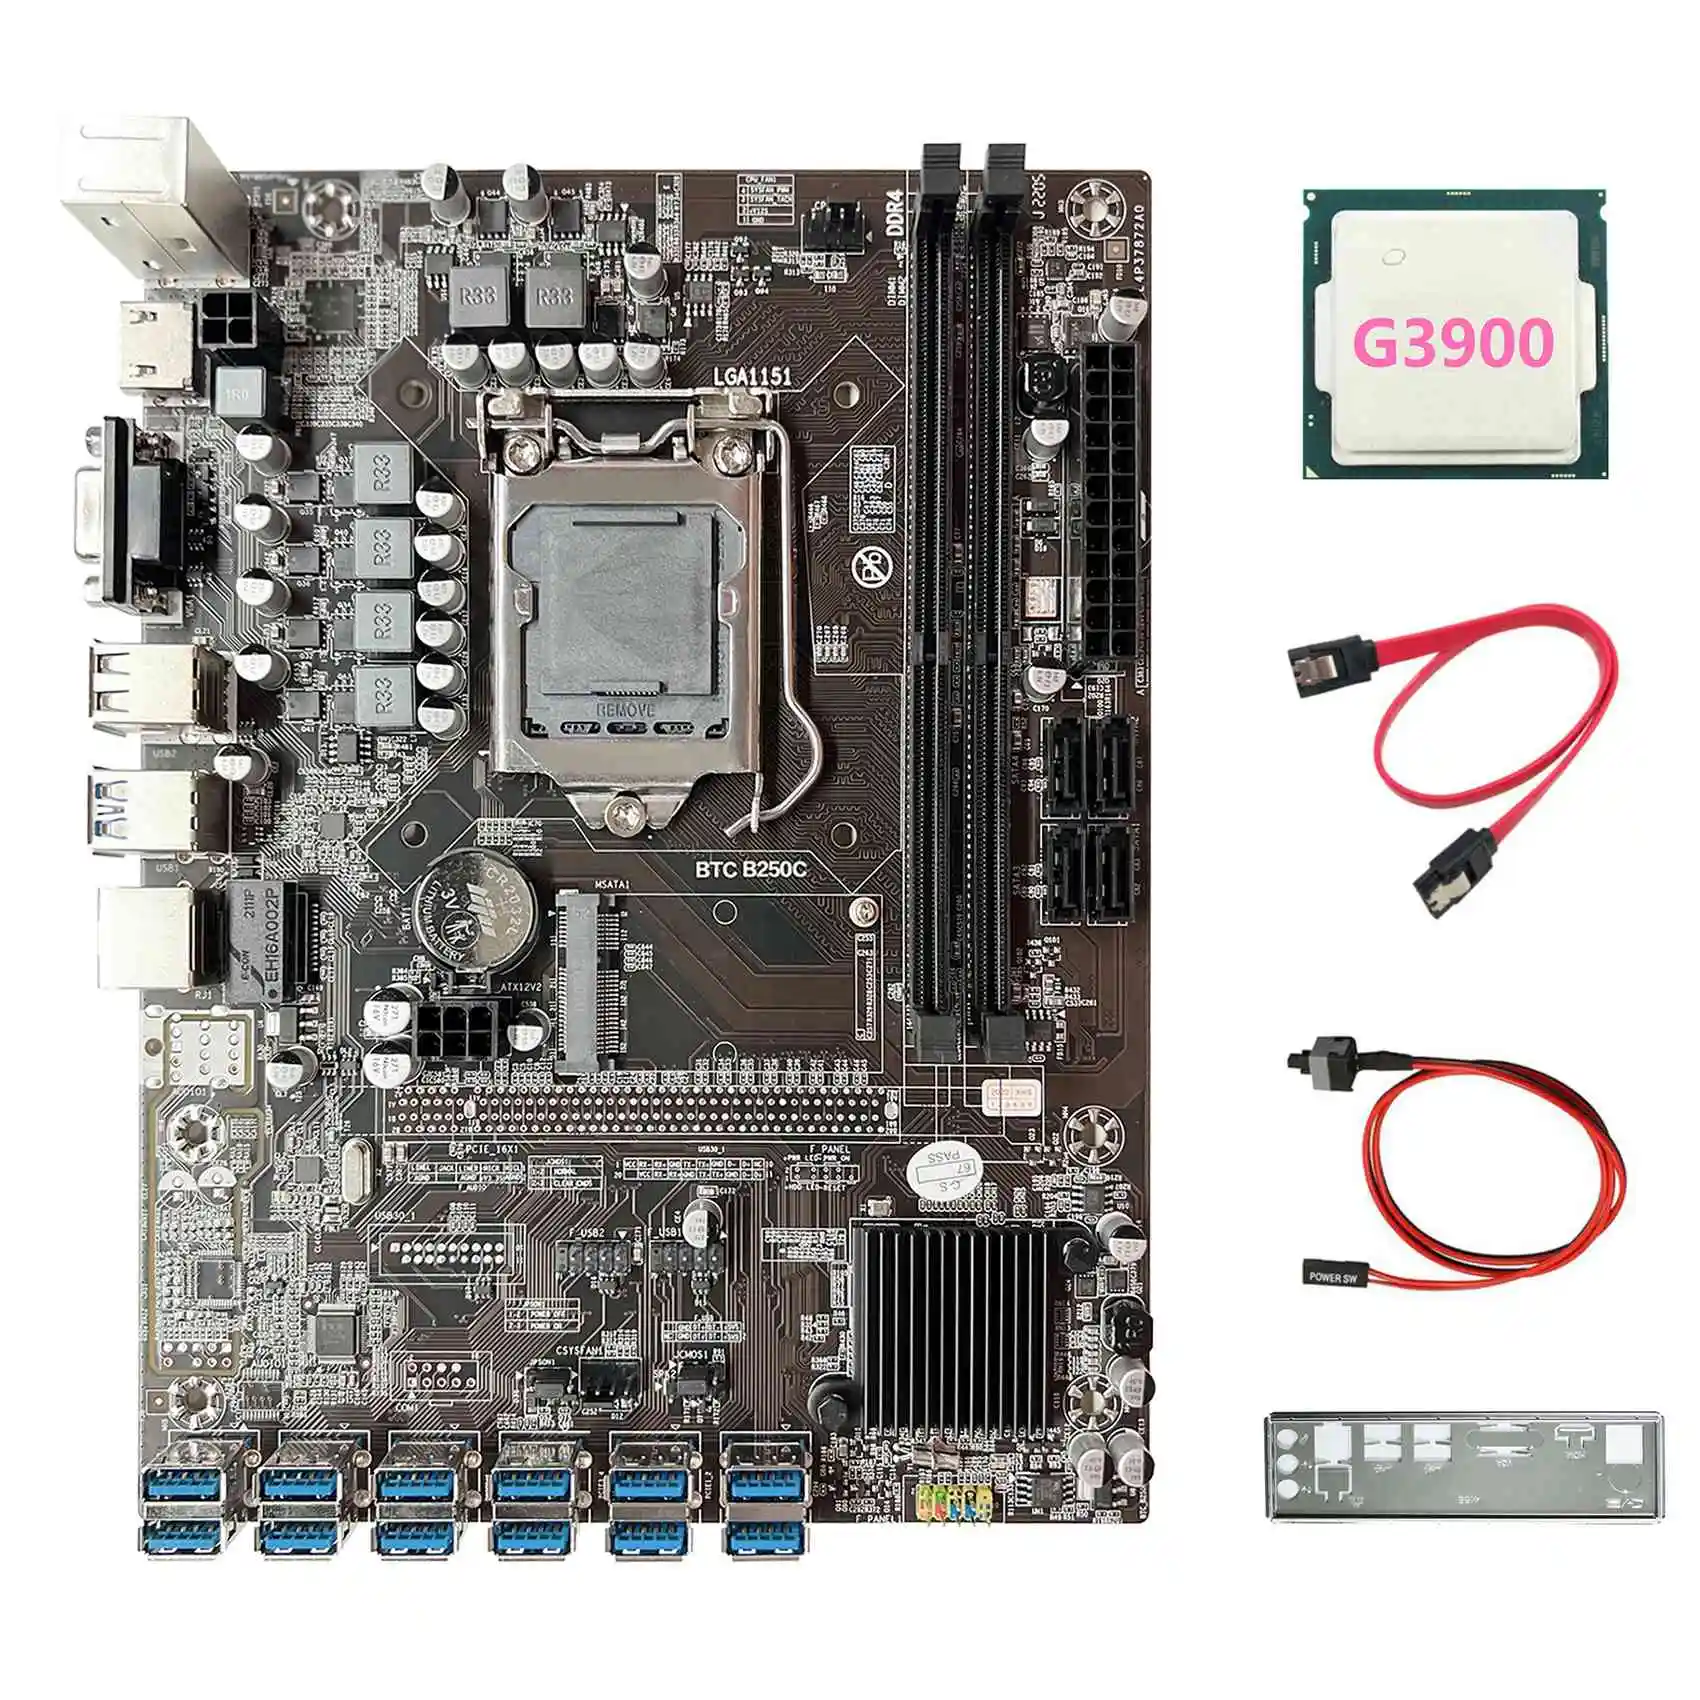 

B250C ETH Miner Motherboard+G3900 CPU+Baffle+SATA Cable+Switch Cable 12USB3.0 Graphics Card Slot LGA1151 for BTC